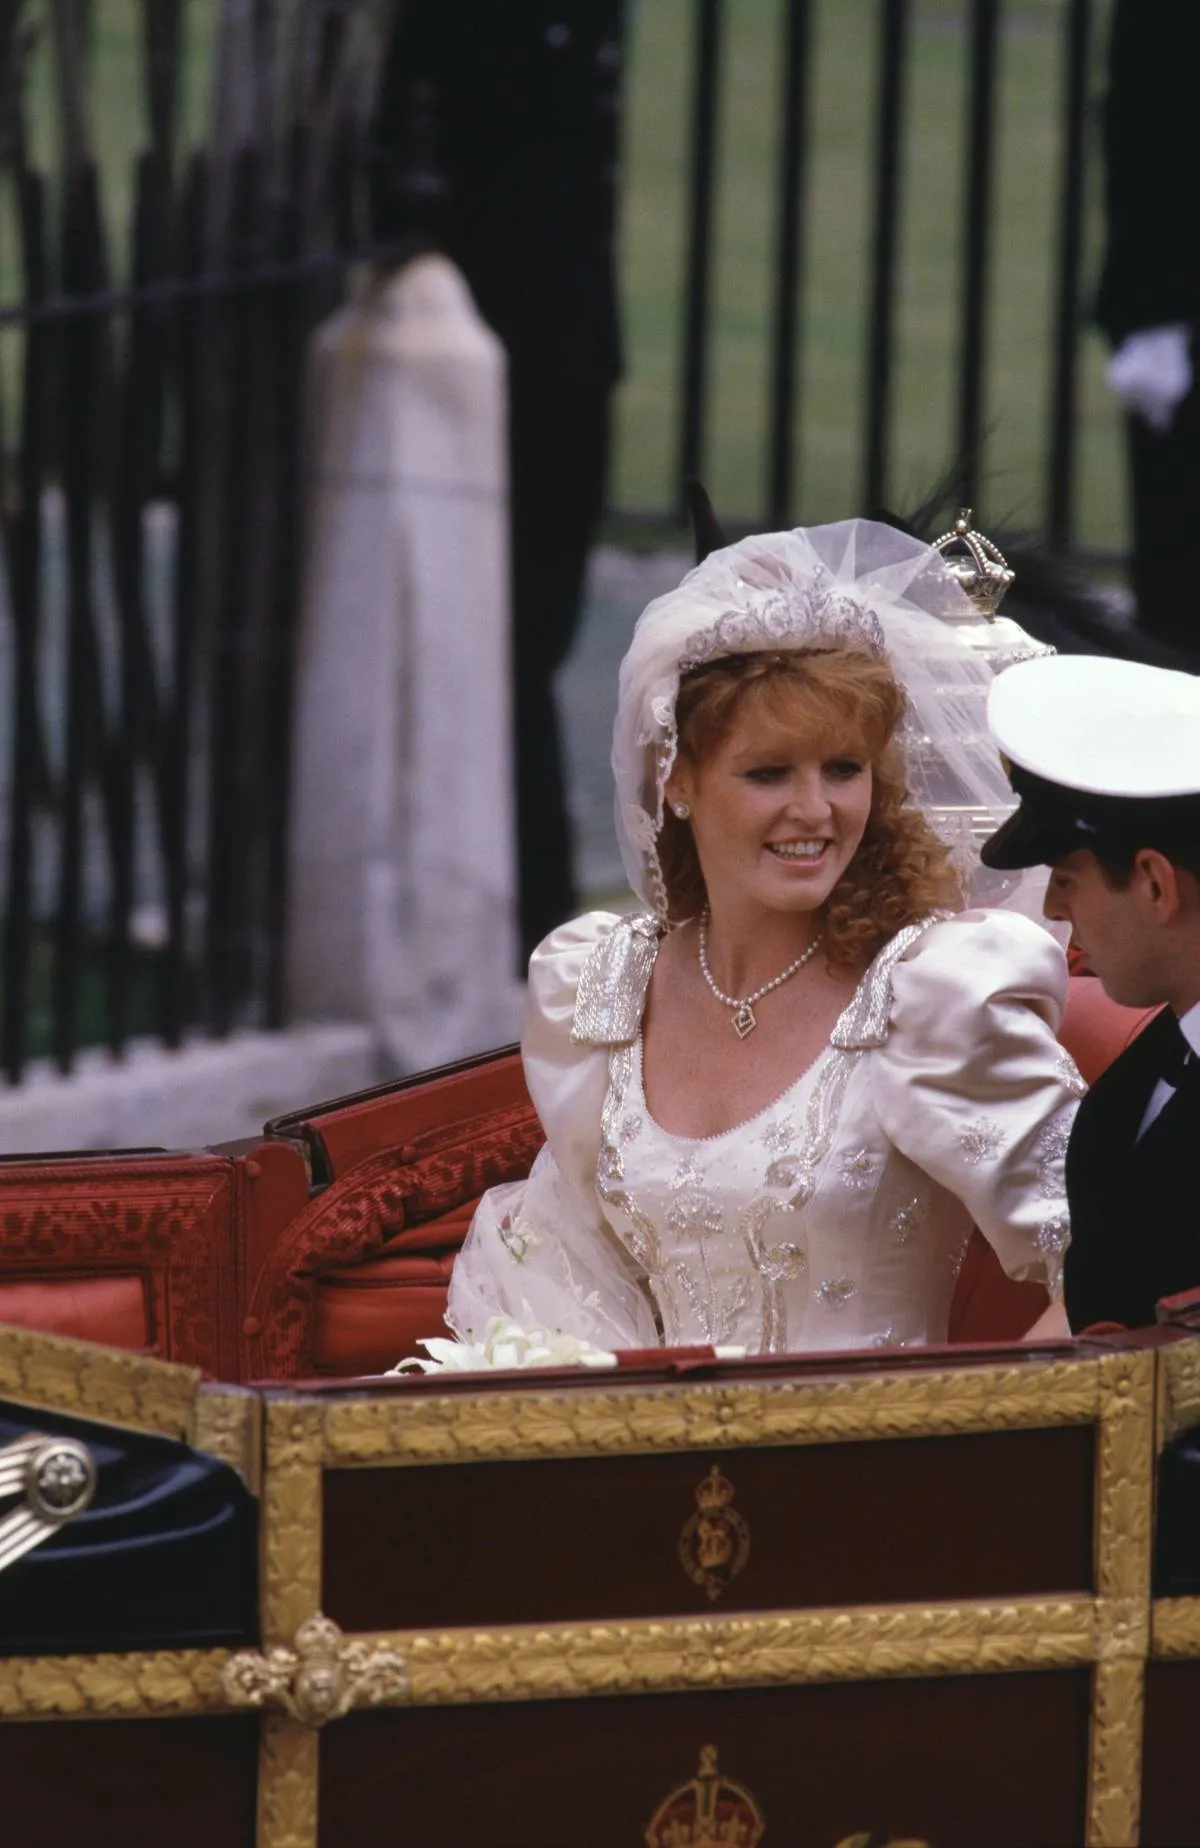 <p>Sarah Ferguson married Prince Andrew at Westminster Abbey in 1986. She wore a headpiece called the <a href="https://www.thecourtjeweller.com/2018/05/the-york-diamond-tiara.html" rel="noopener noreferrer">York Diamond Tiara</a>, which is said to have been purchased for her by the Queen.</p> <p>Sarah continued to wear the tiara and kept it after her marriage to Andrew ended in divorce in 1996. She was last seen wearing it publicly at Elton John's White Tie and Tiara Ball in 2001. Many people predicted that her daughter, Princess Eugenie, would wear the York Diamond Tiara for her 2018 wedding. Instead, she opted to borrow an emerald tiara from the Queen.</p>